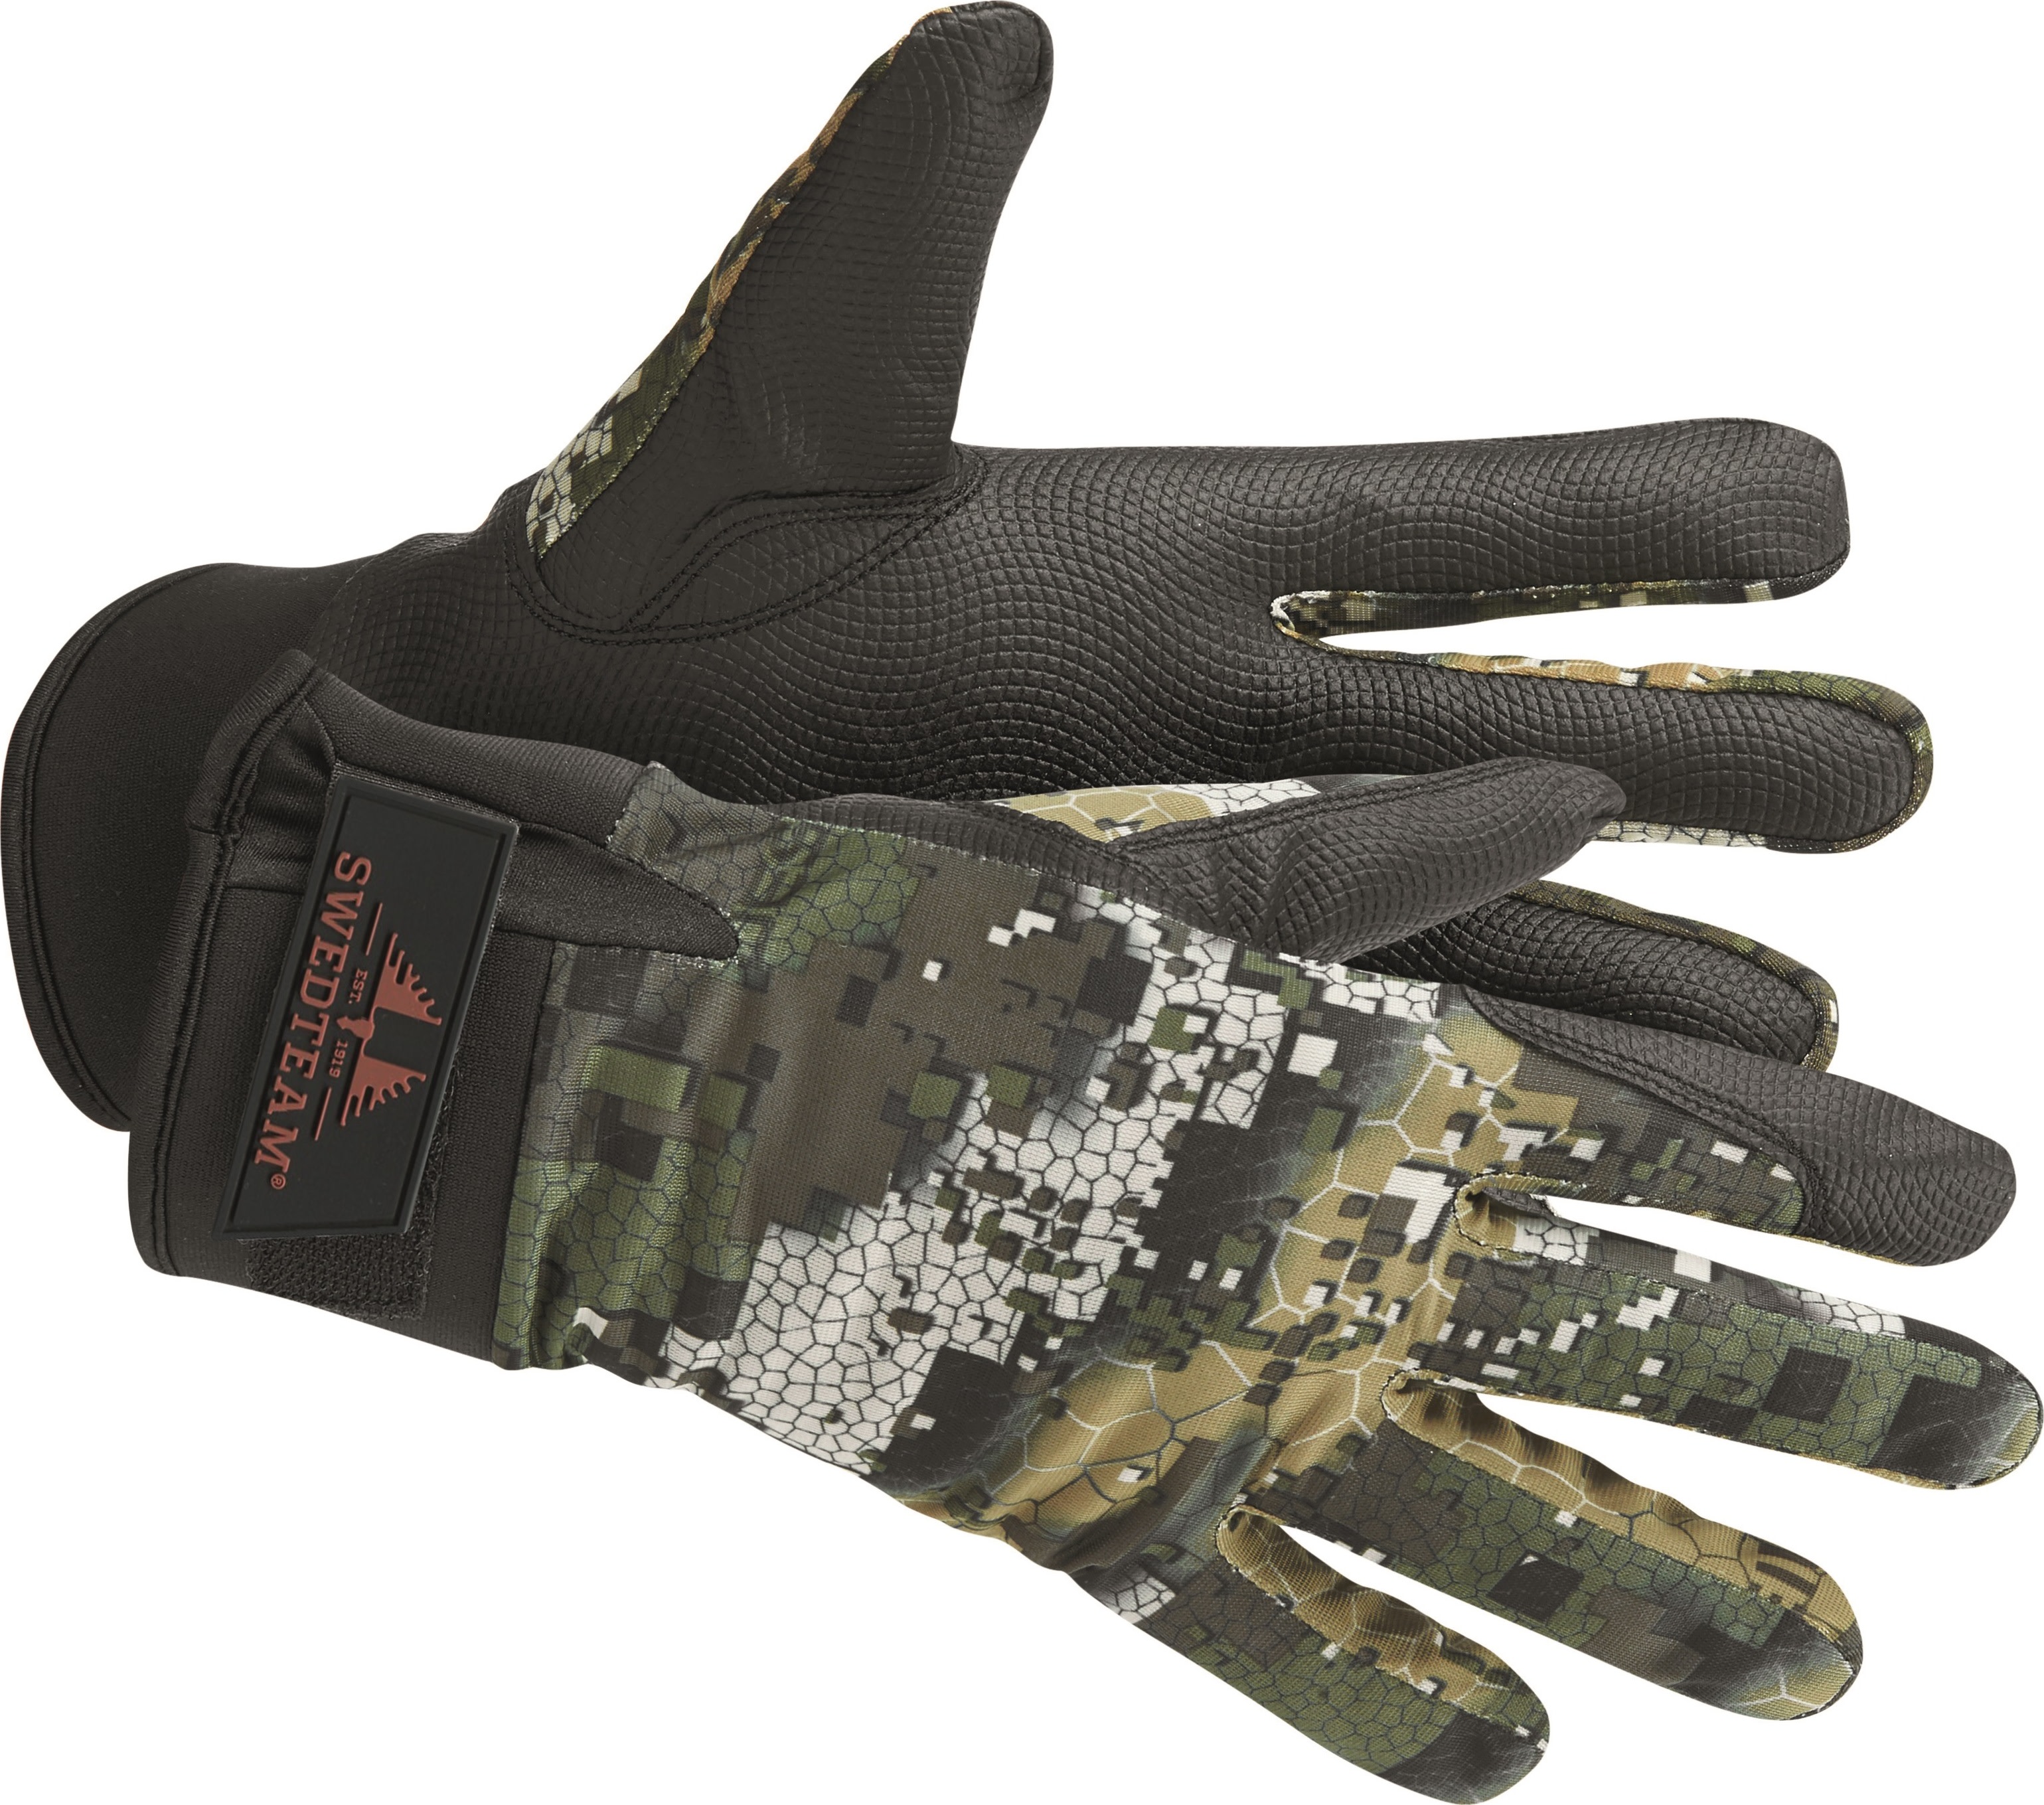 Hunting Gloves | Buy Hunting Gloves here | Outnorth